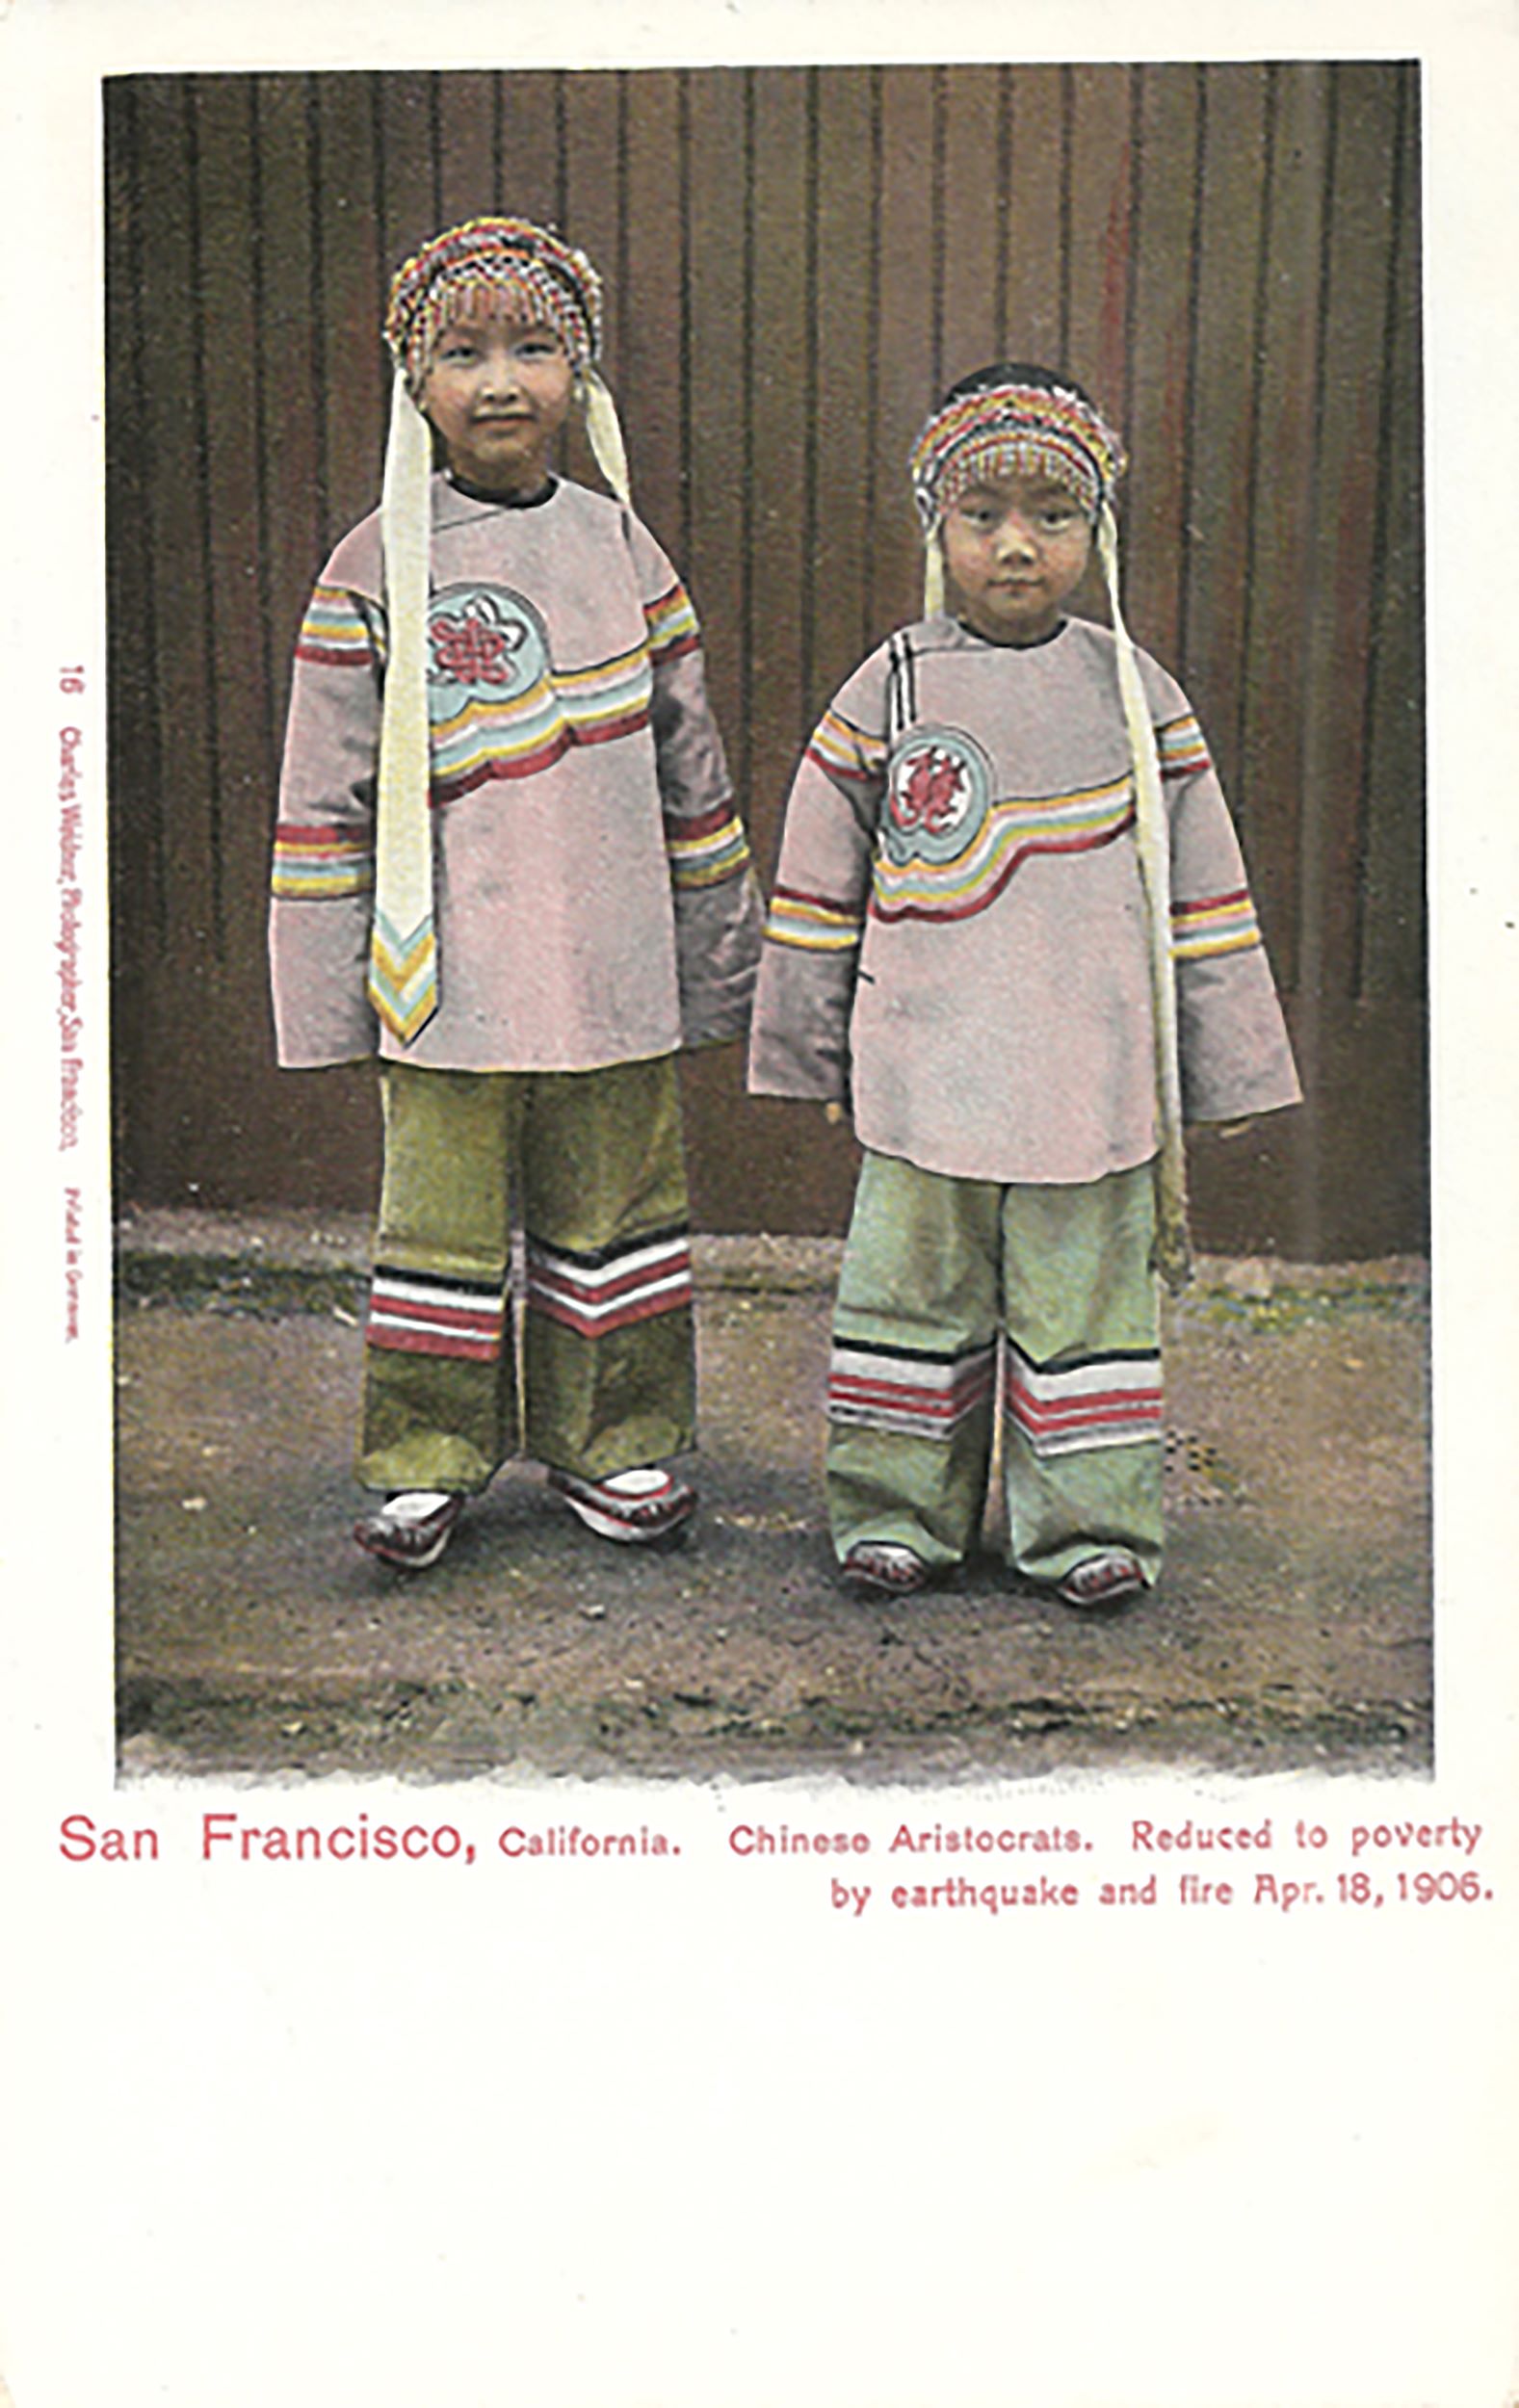 Hand-colored postcard showing two young children in traditonal Chinese dress. The caption underneath, in red, reads "San Francisco, California / Chinese Aristocrats. Reduced to poverty by earthquake and fire Apr. 18, 1906"